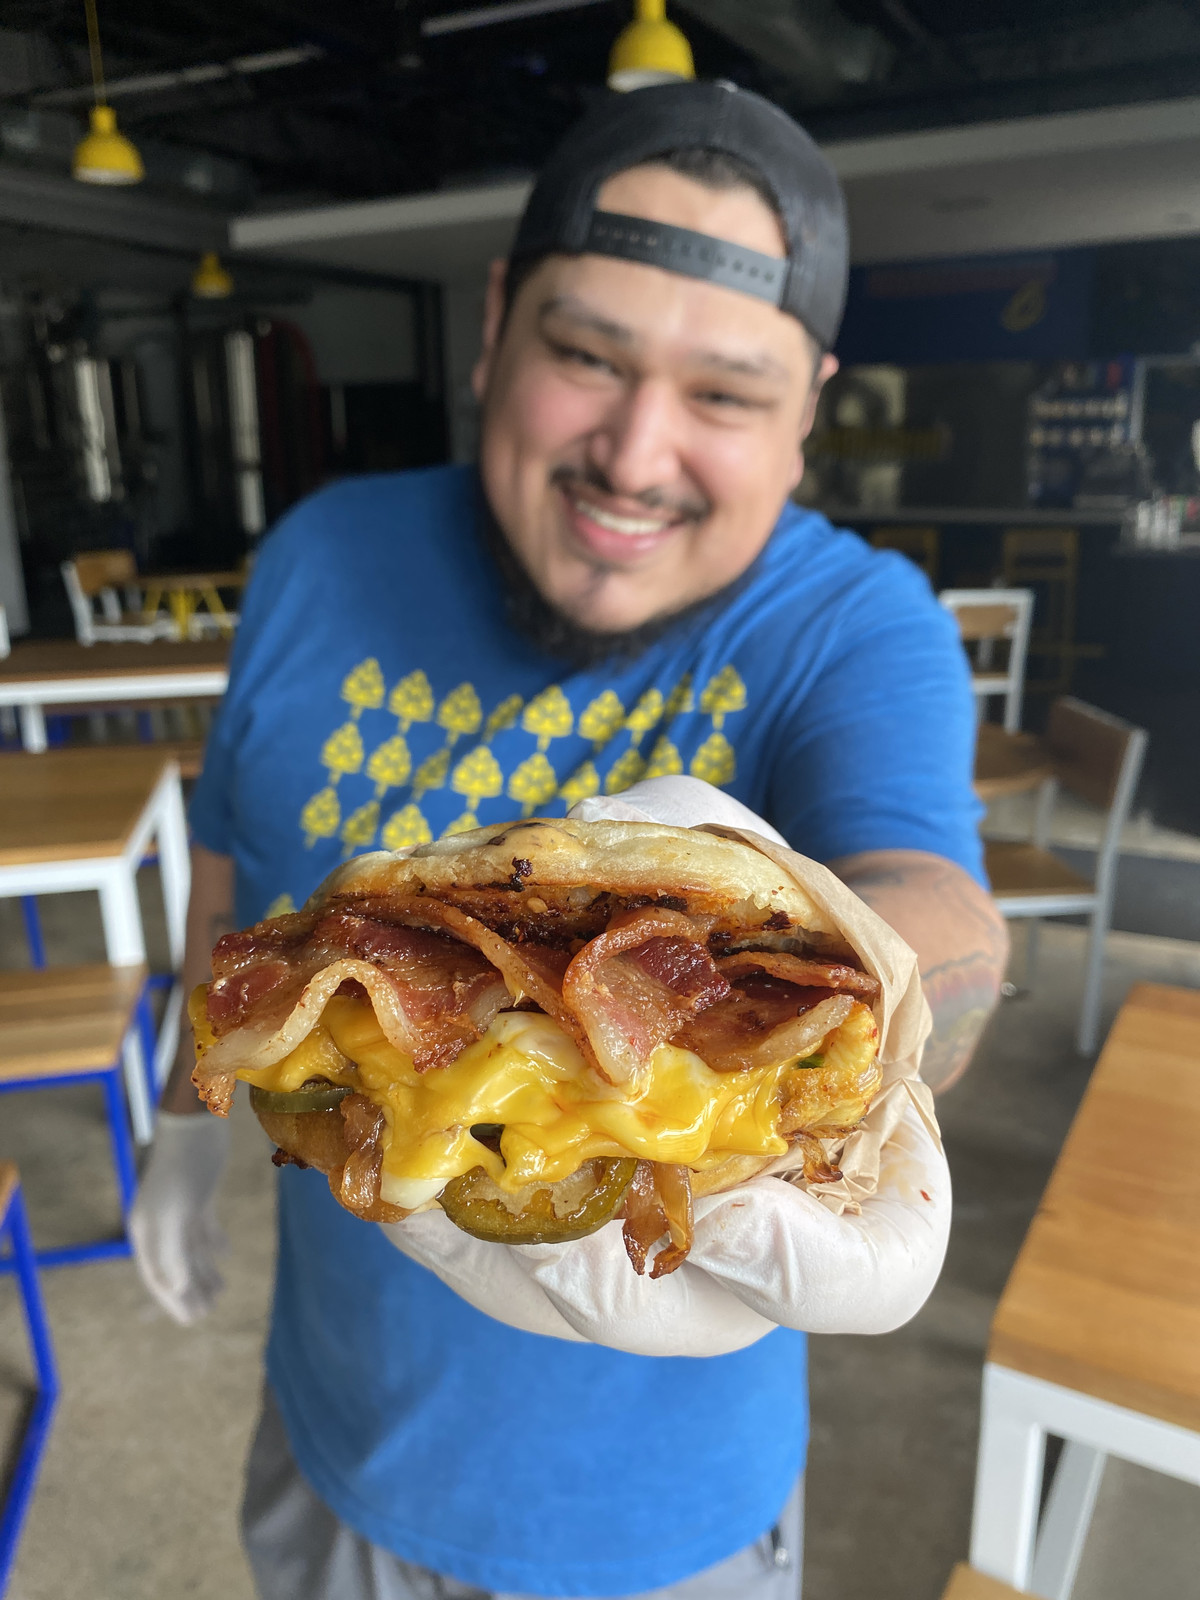 Chef Daniel Leal holding a breakfast sandwich loaded with cheesy eggs and a slab of bacon.